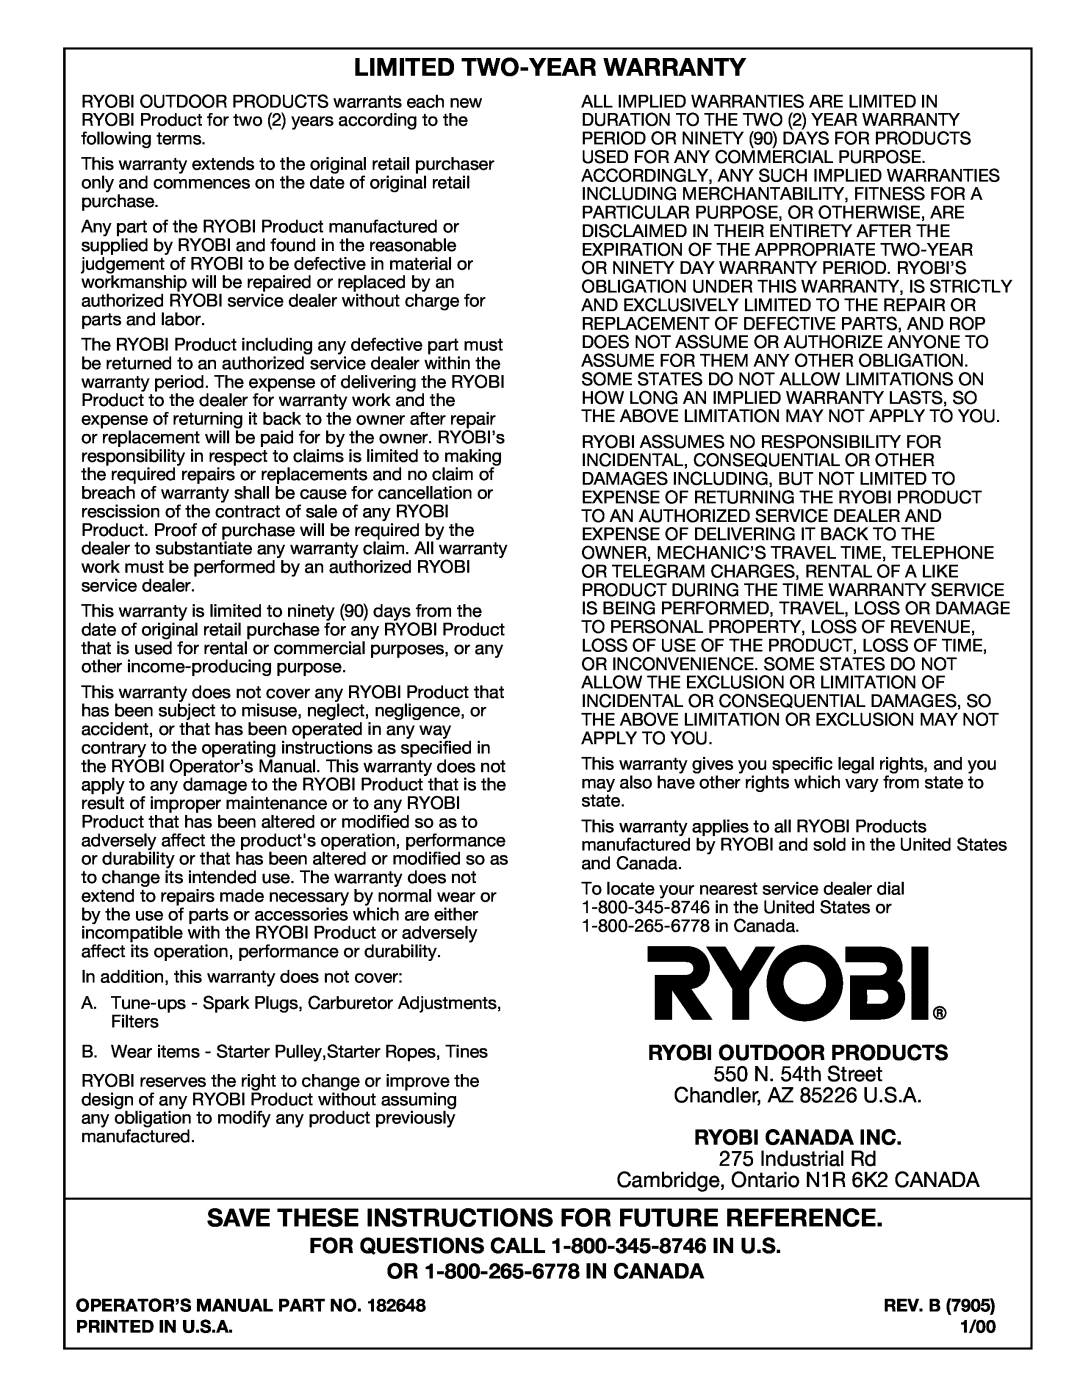 Ryobi Outdoor 510r manual Limited Two-Year Warranty, Save These Instructions For Future Reference, Ryobi Outdoor Products 